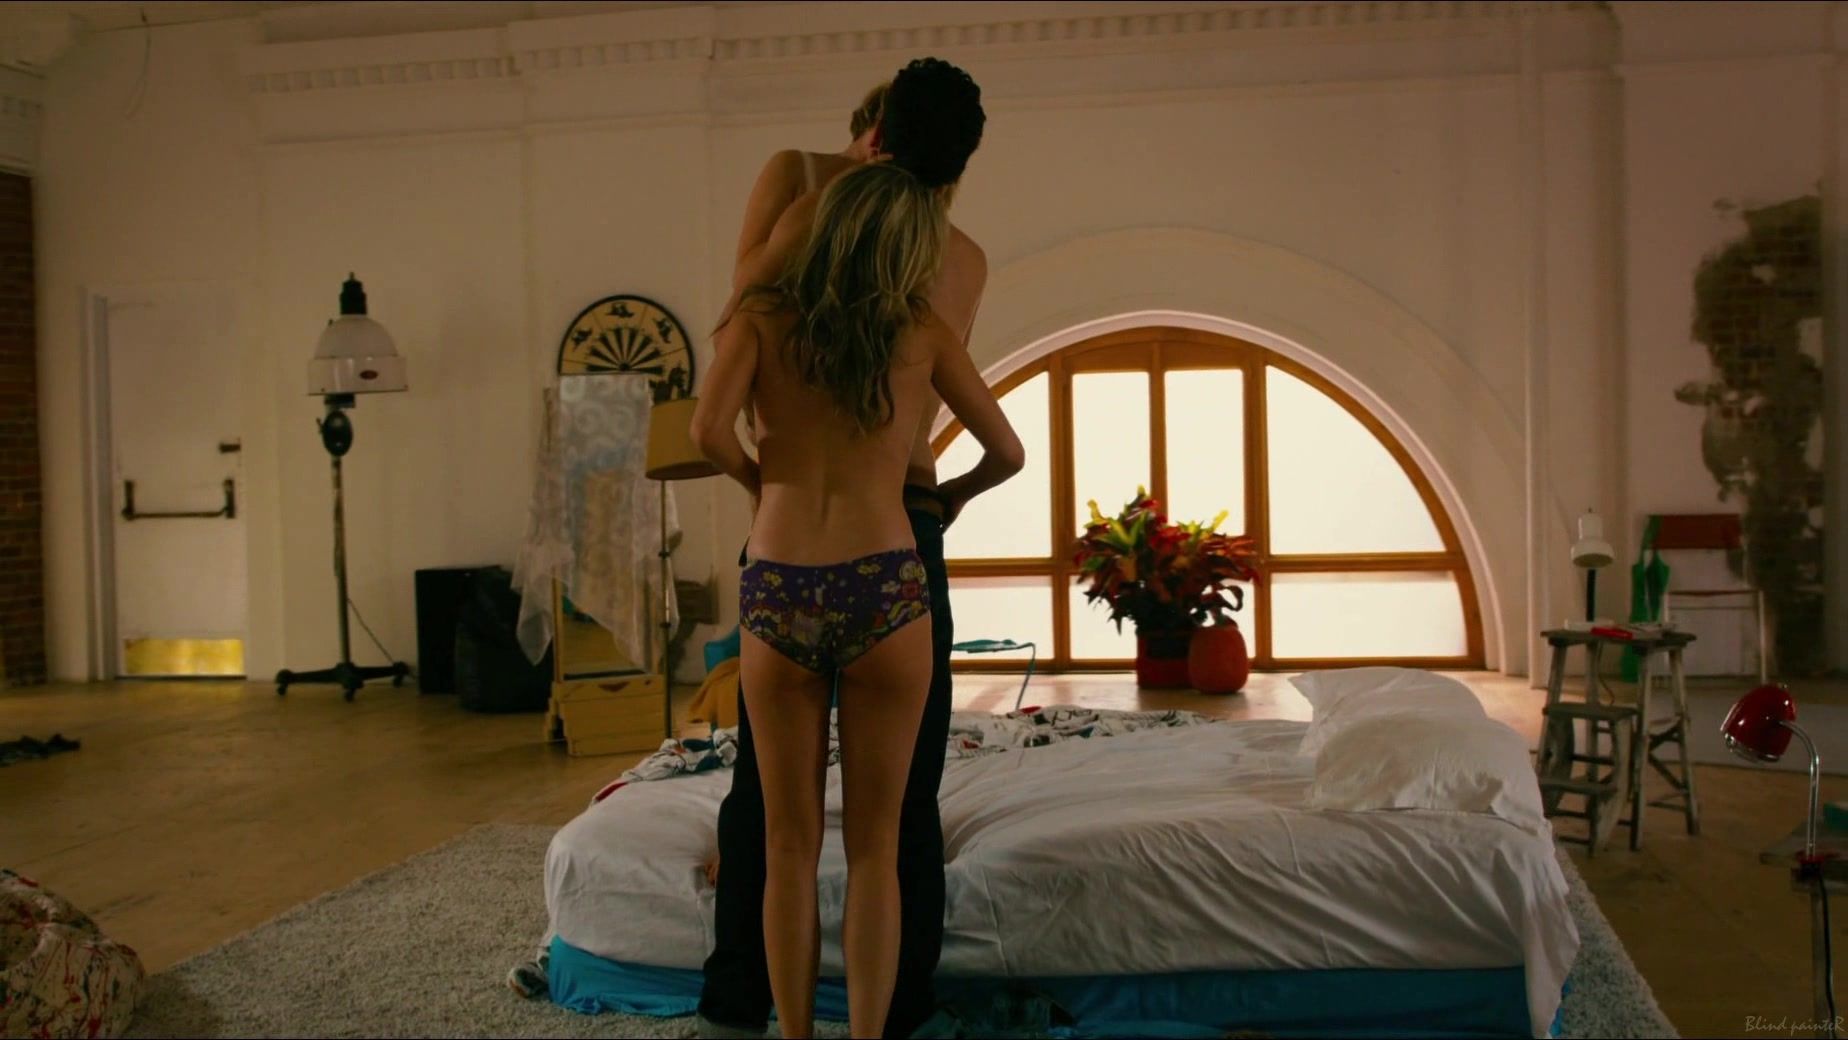 Swingers Michelle Williams nude - Take This Waltz (2011) Squirting - 1